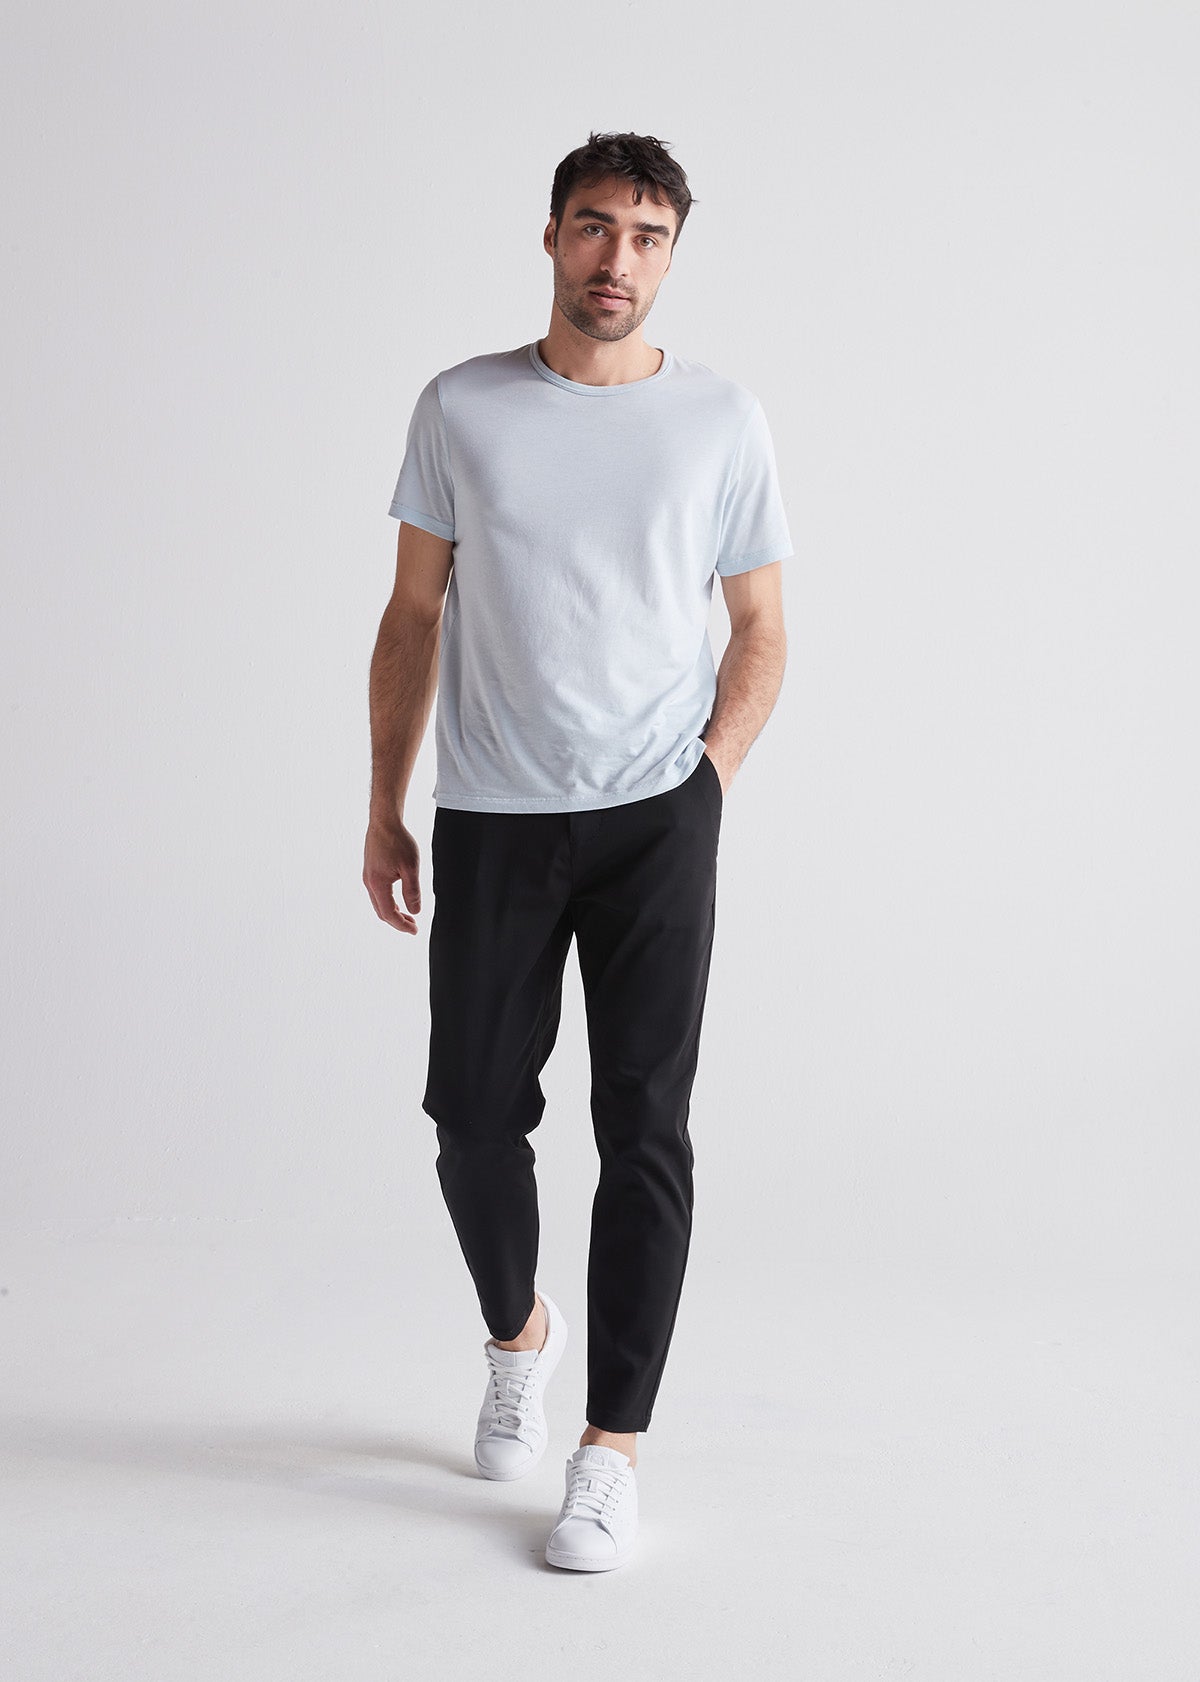 Smart Stretch Pant Relaxed Taper - Black